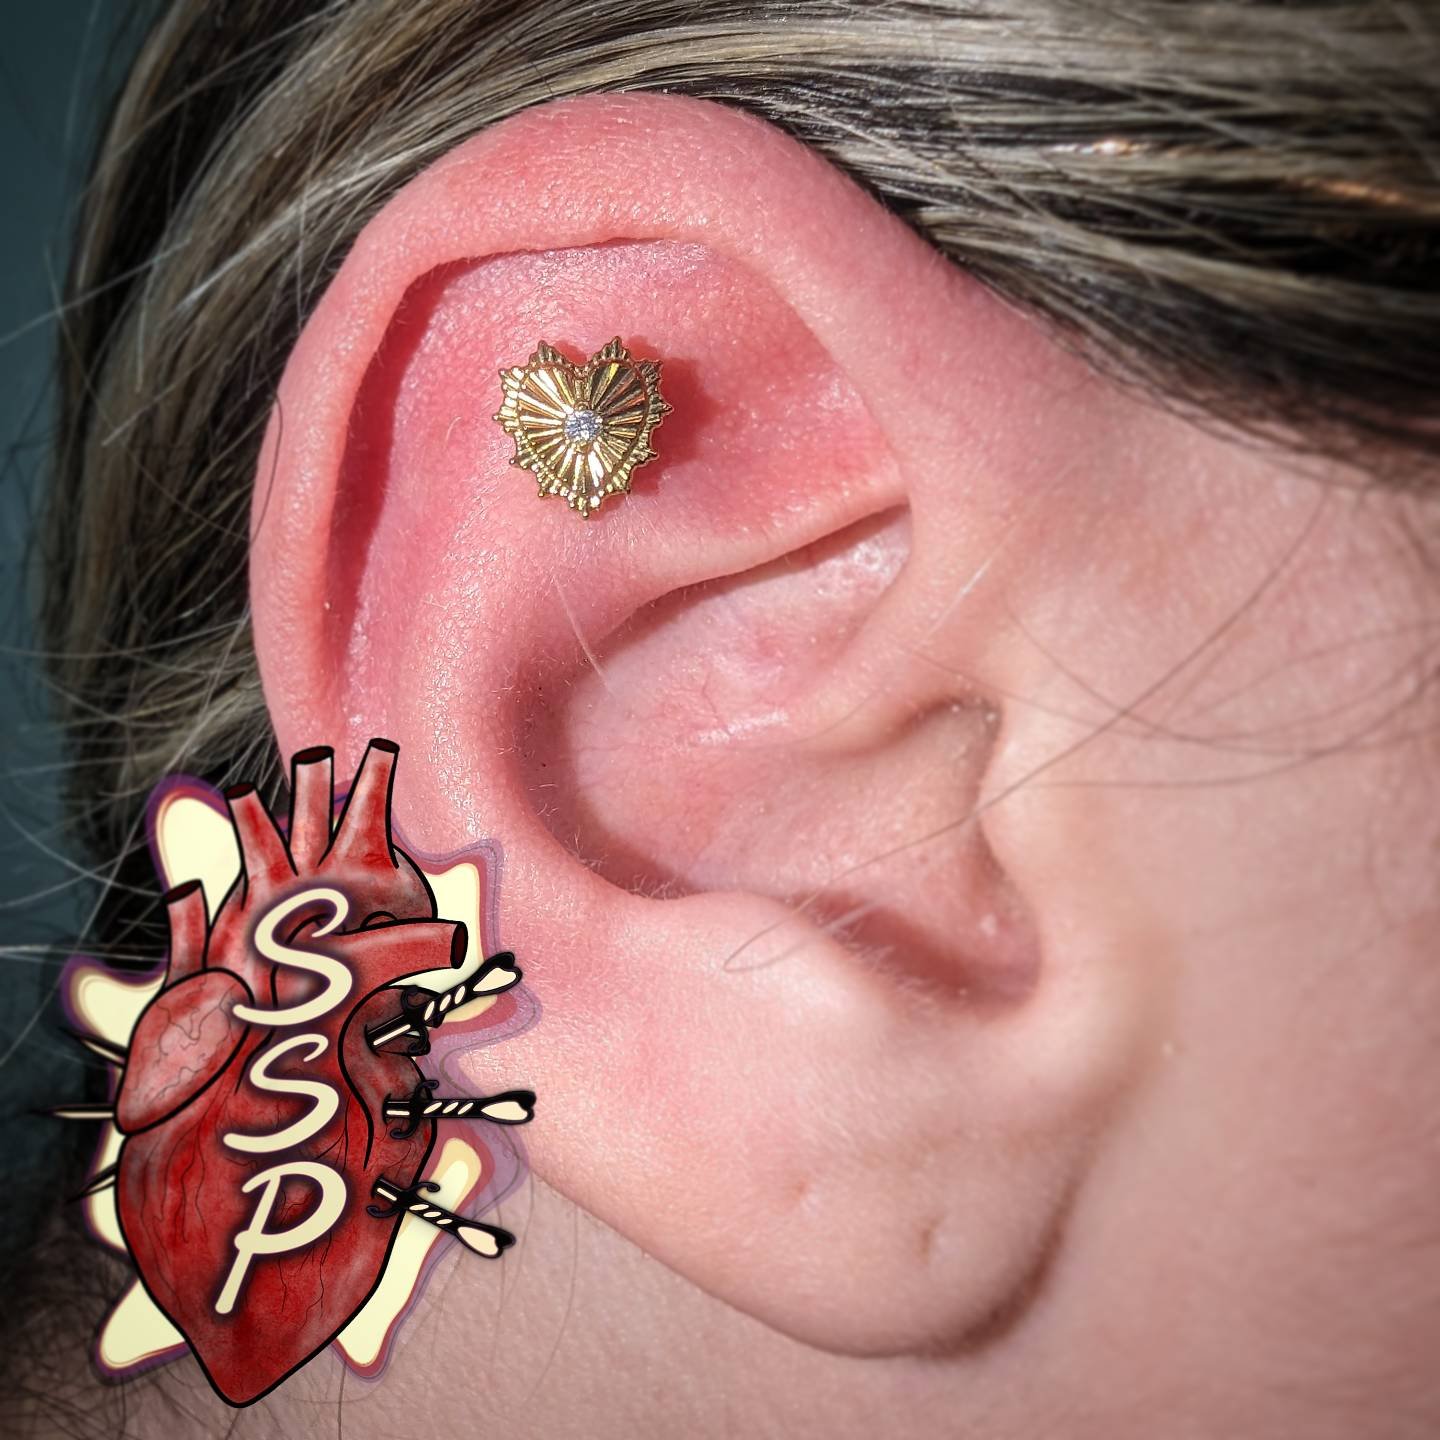 Flat piercing with an amazing titanium heart that was anadized gold. Probably my favorite piece we've gotten in.

If you're interested in coming in for a piercing. There is no appointment needed, you can just come into the shop while we are open. Any